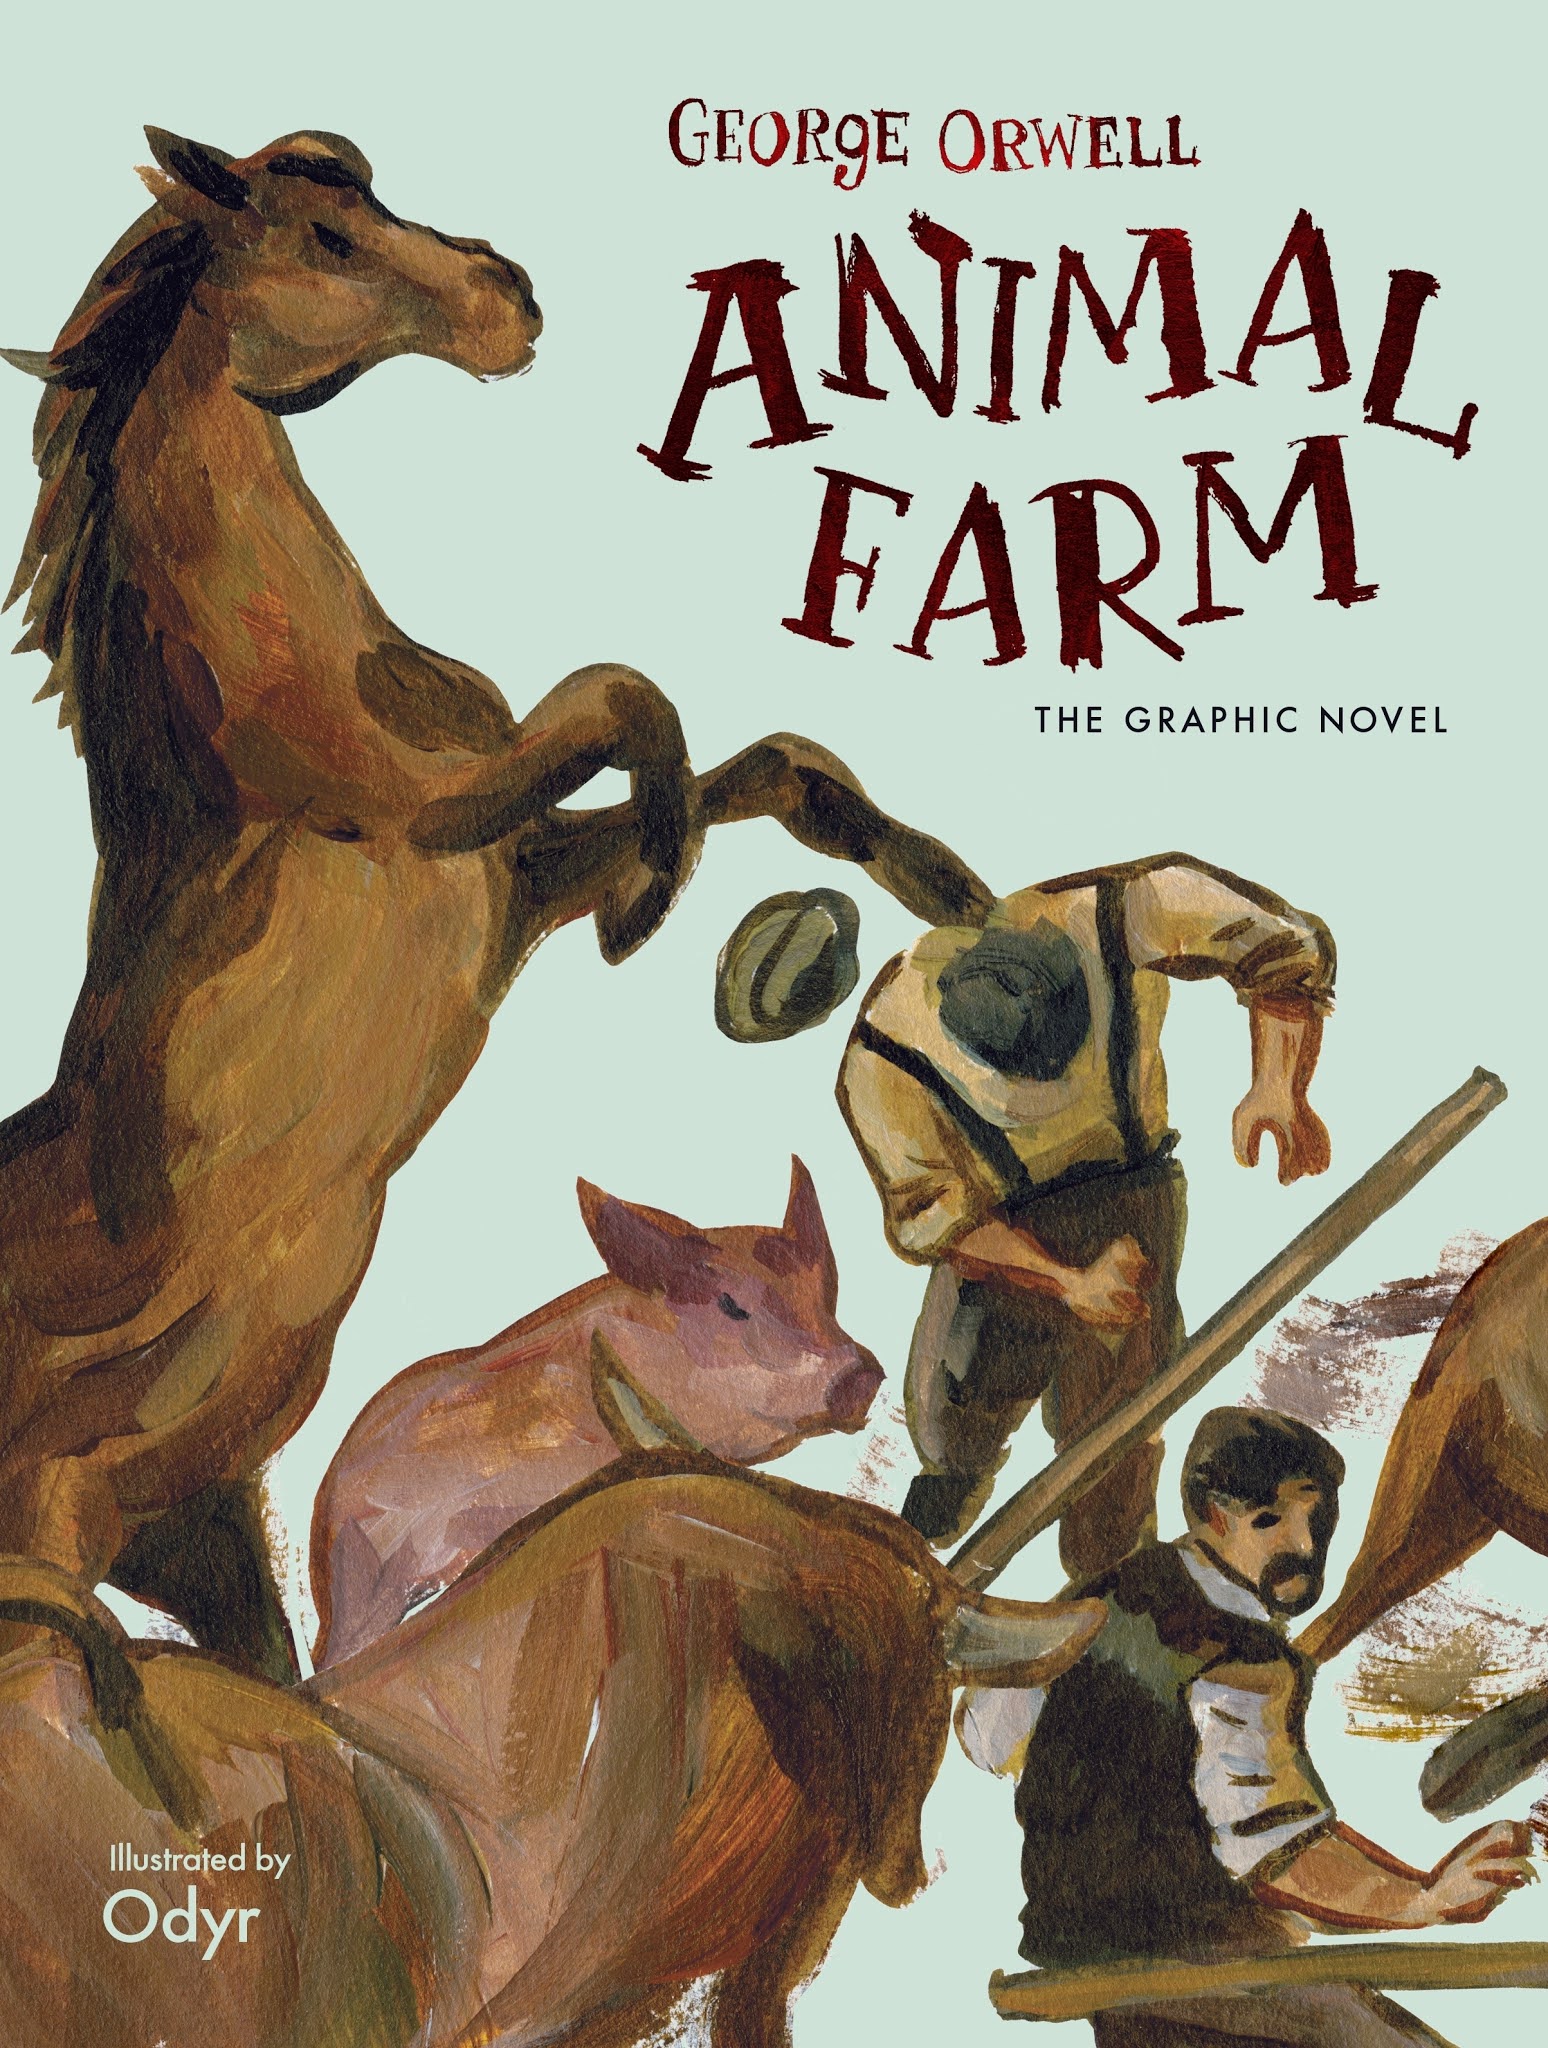 book review of animal farm